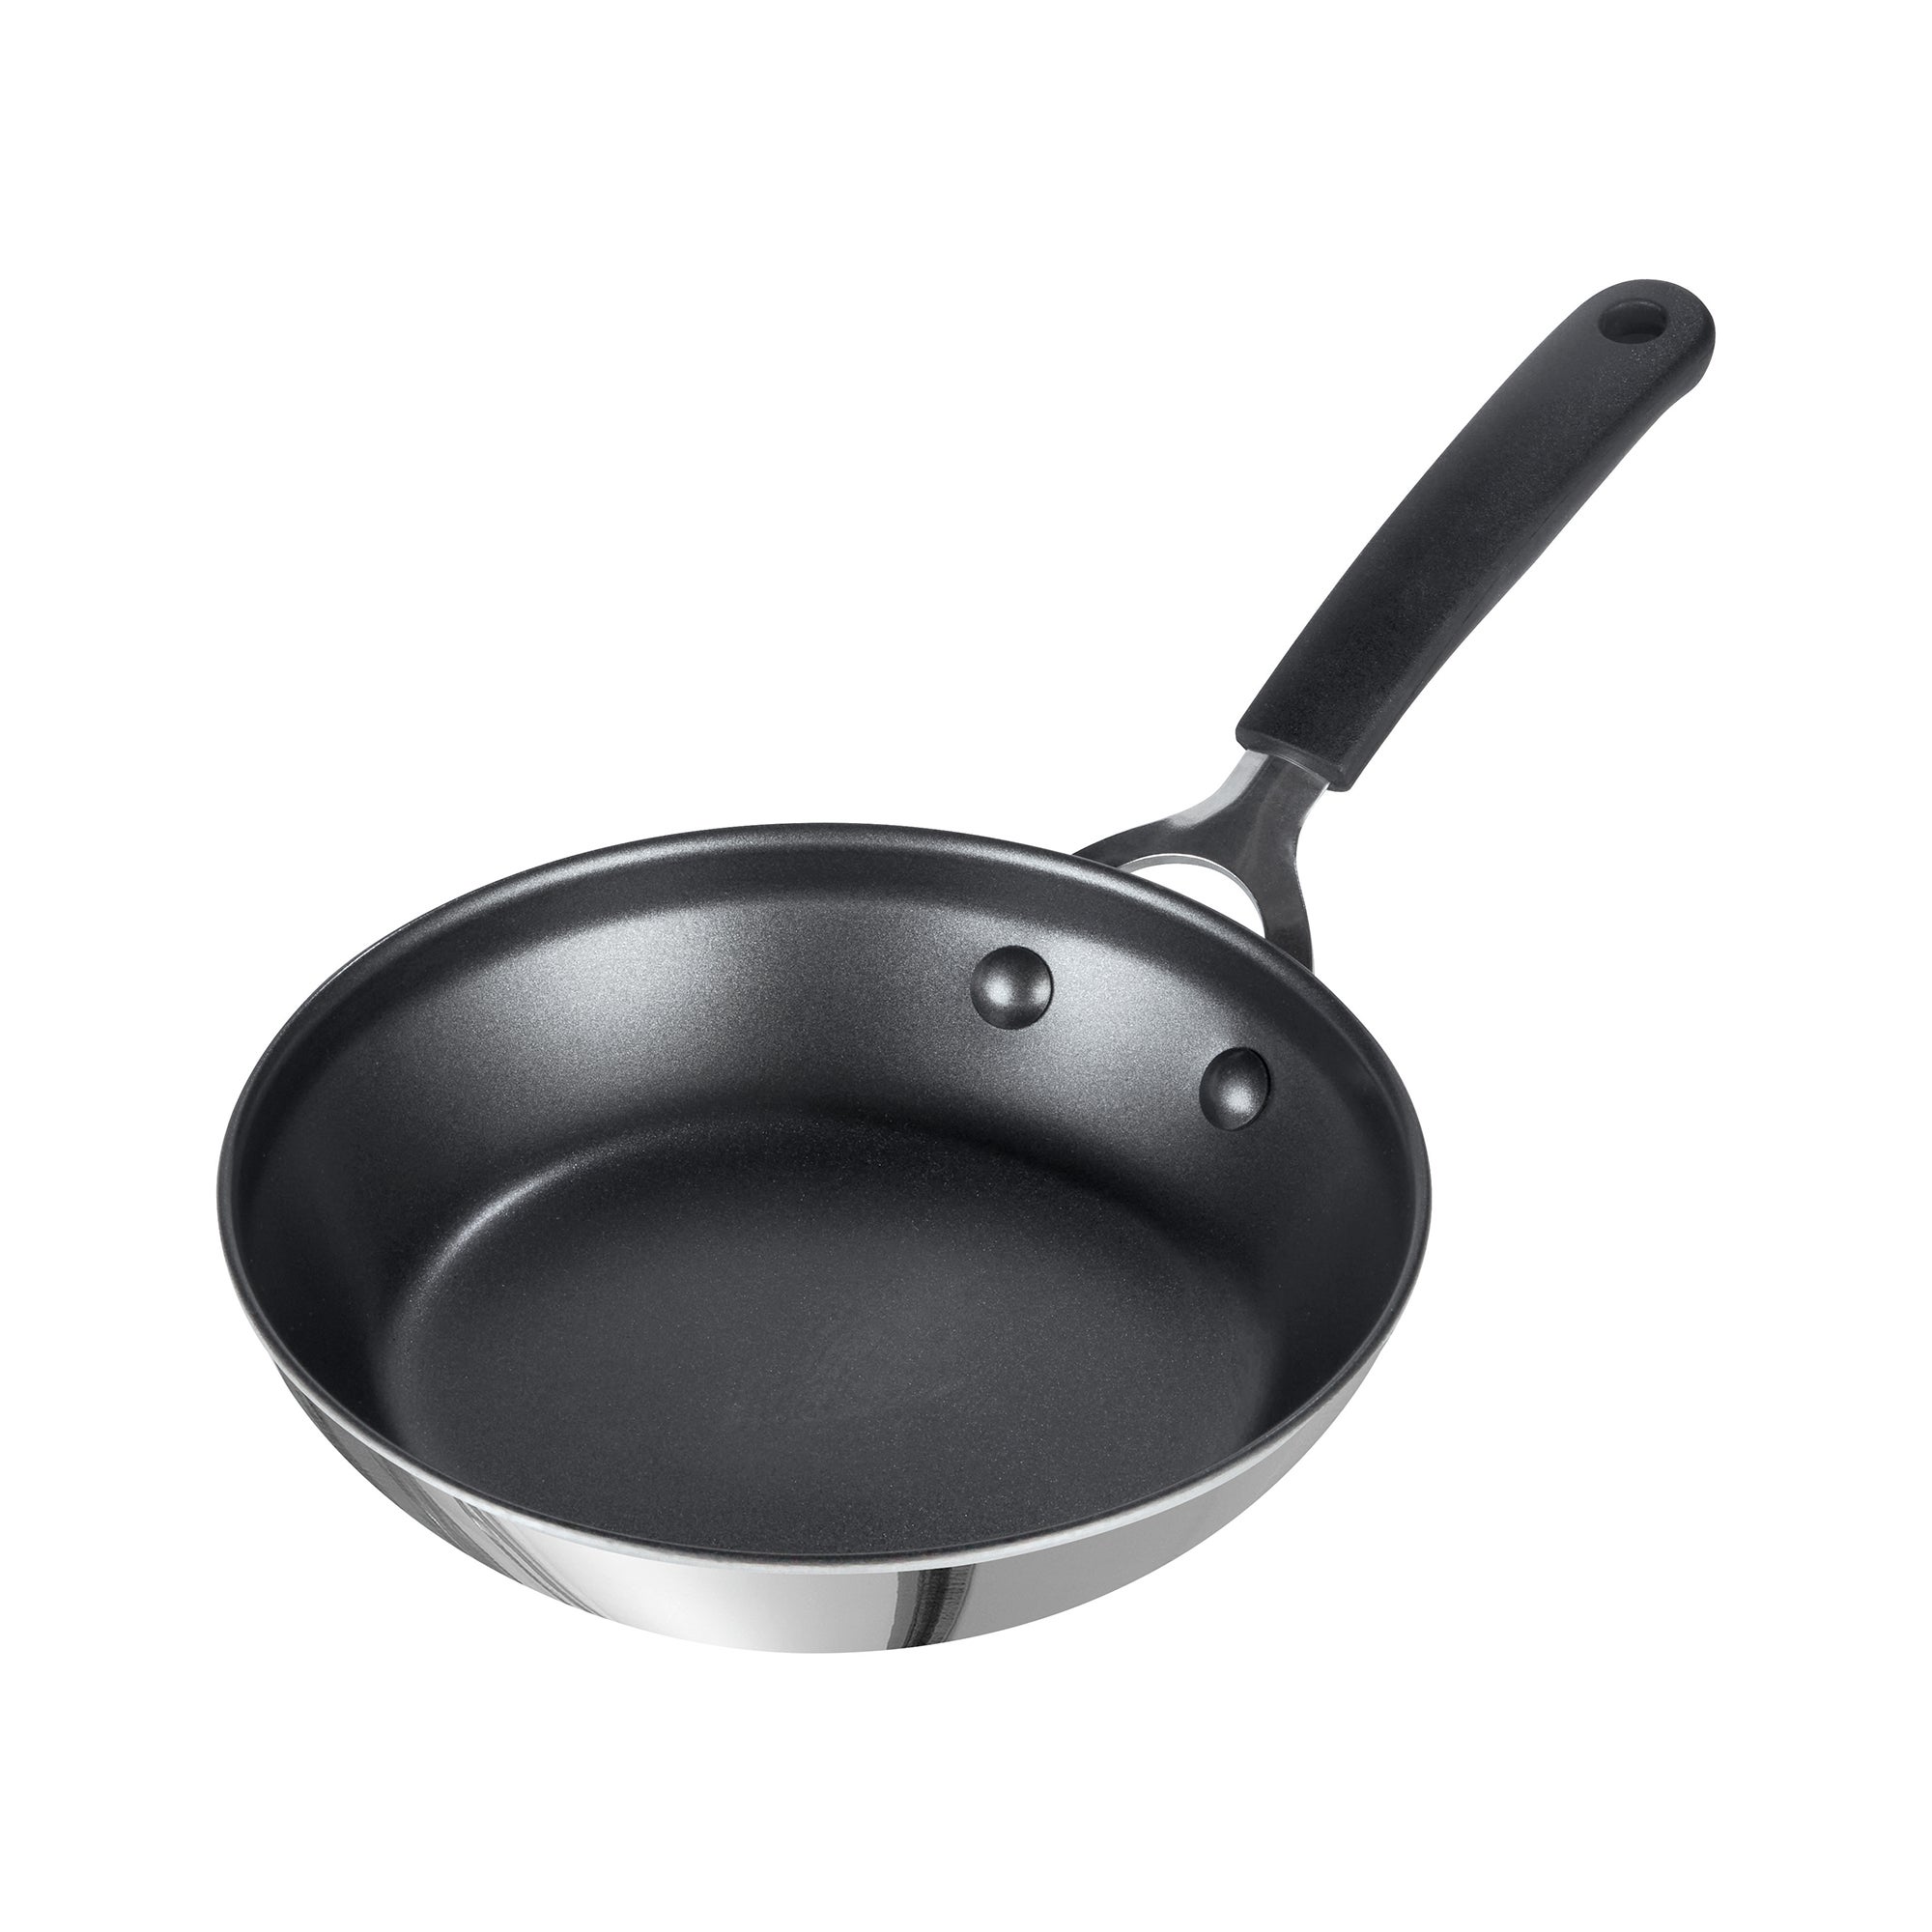 Prestige Made to Last Non-Stick Frying Pan, 25cm